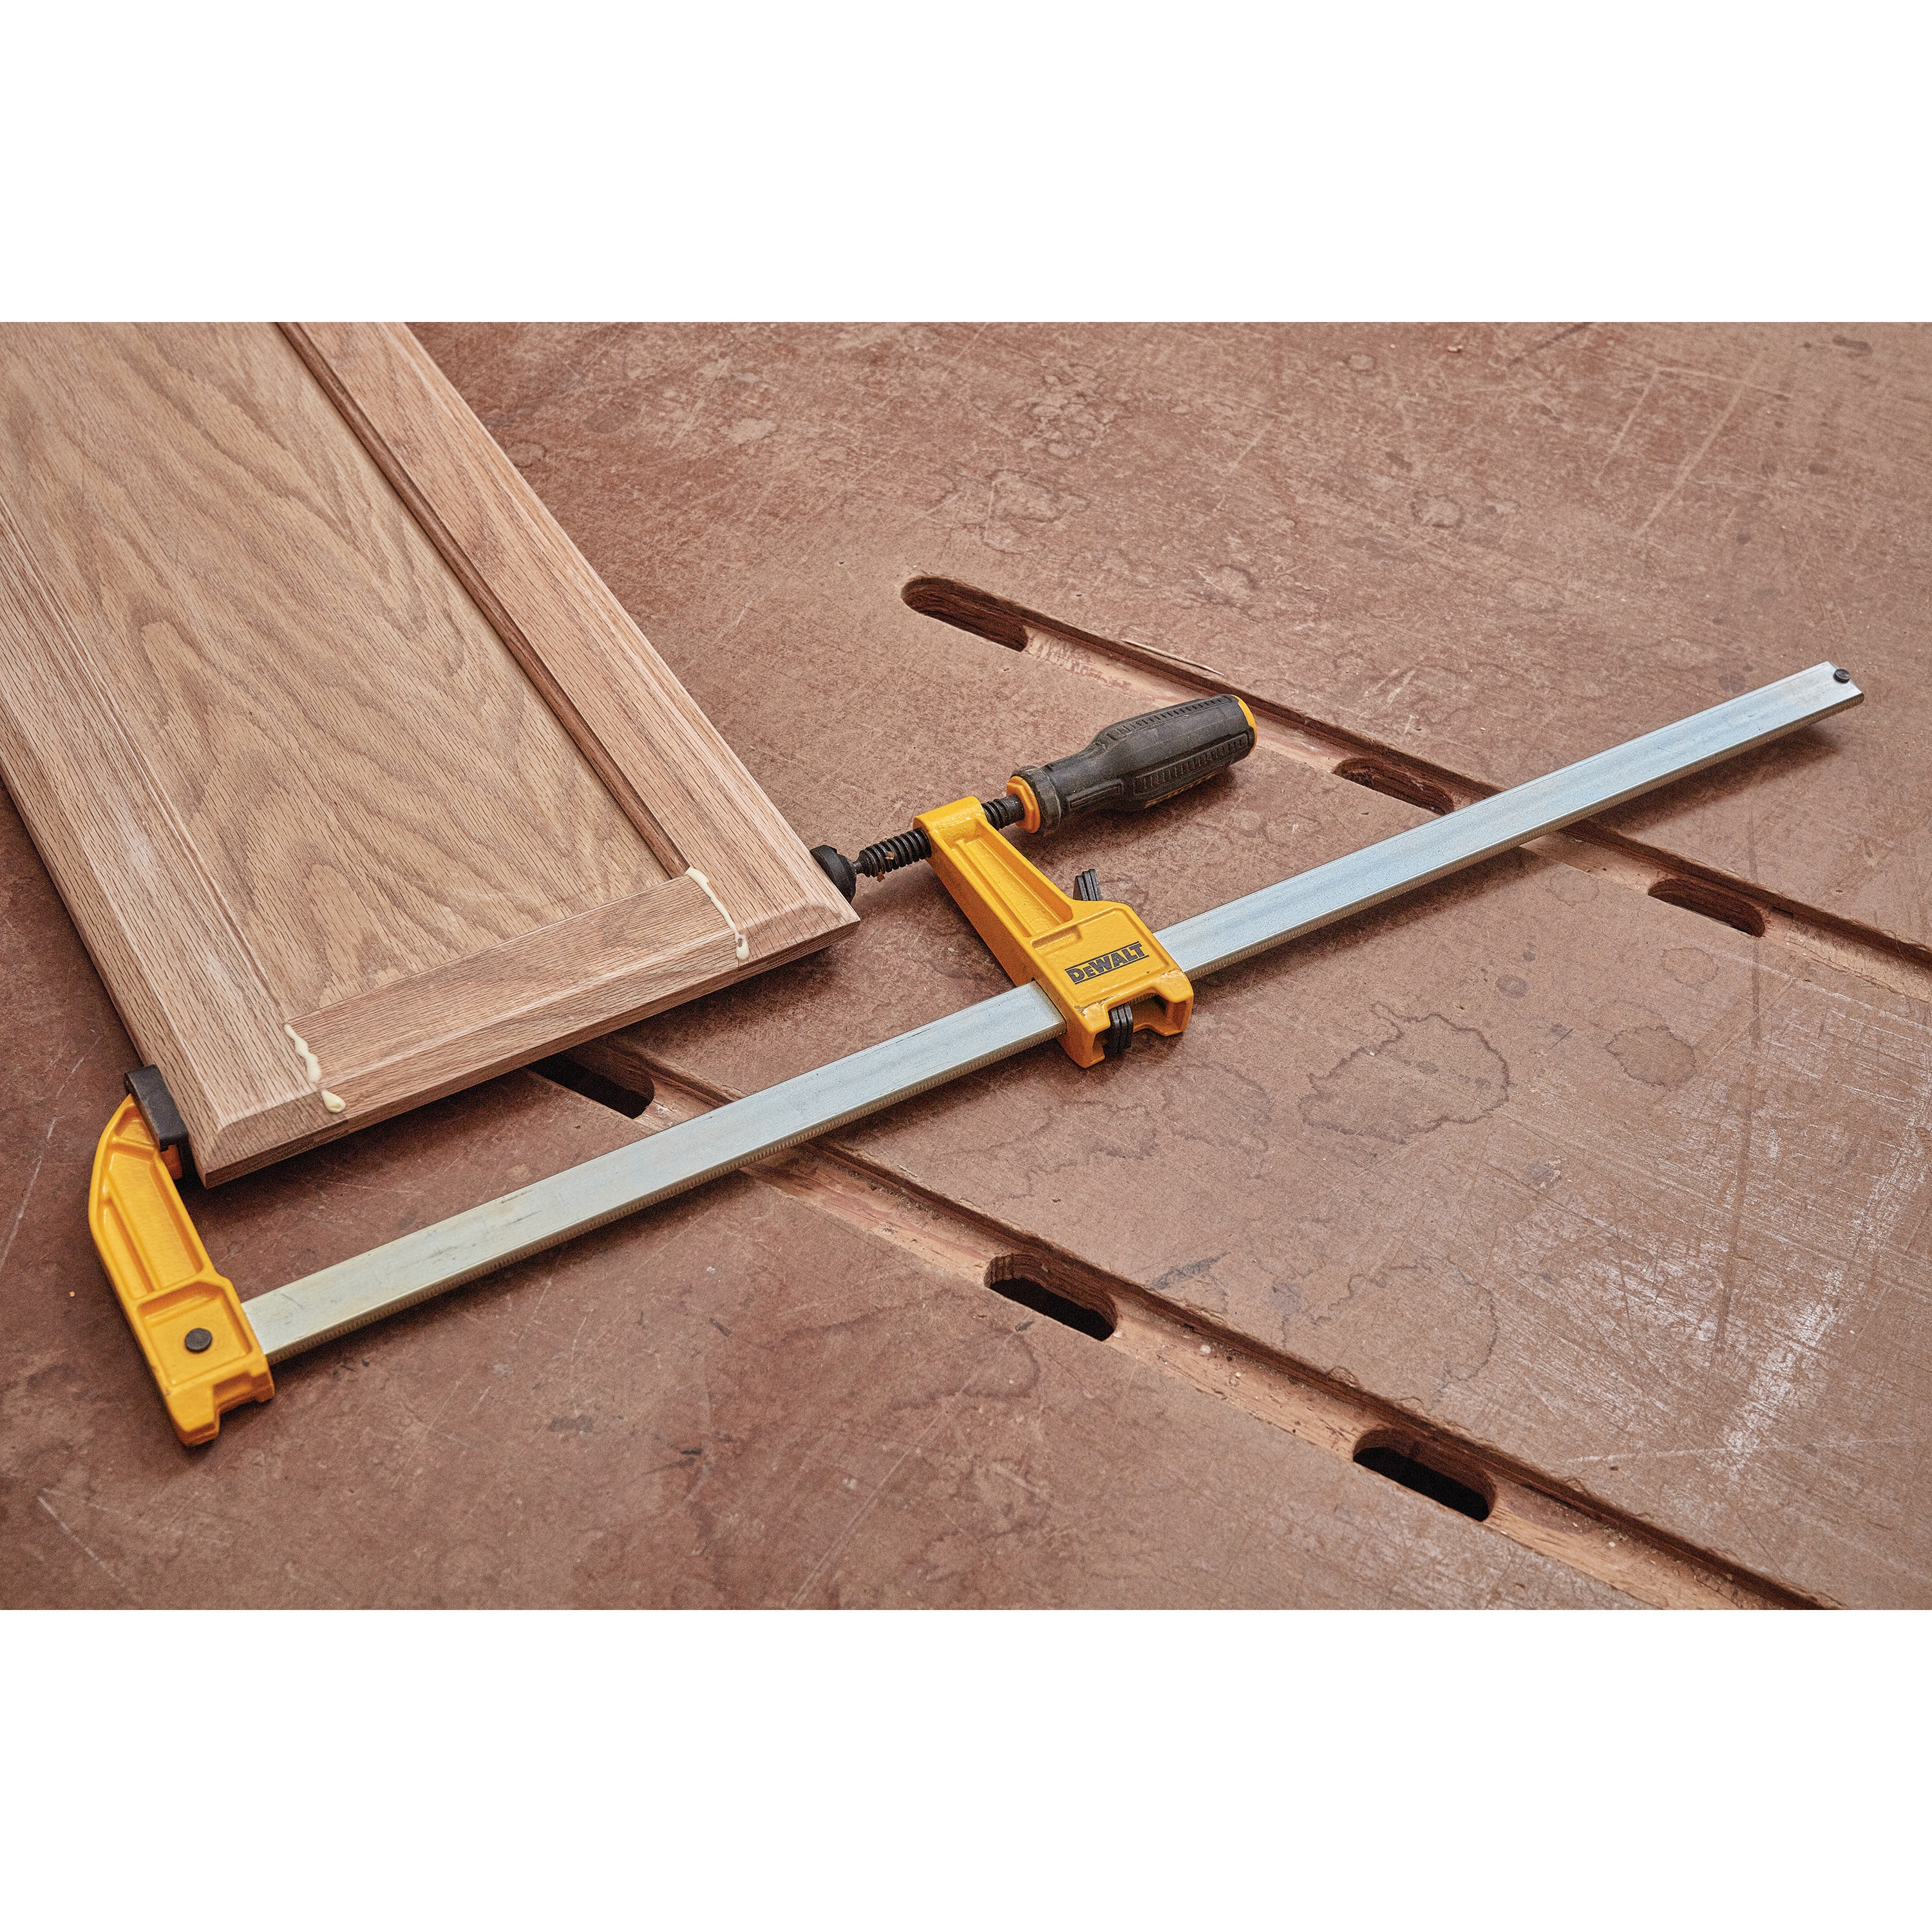 6 inch Heavy Duty Bar Clamp being used on wooden structures.